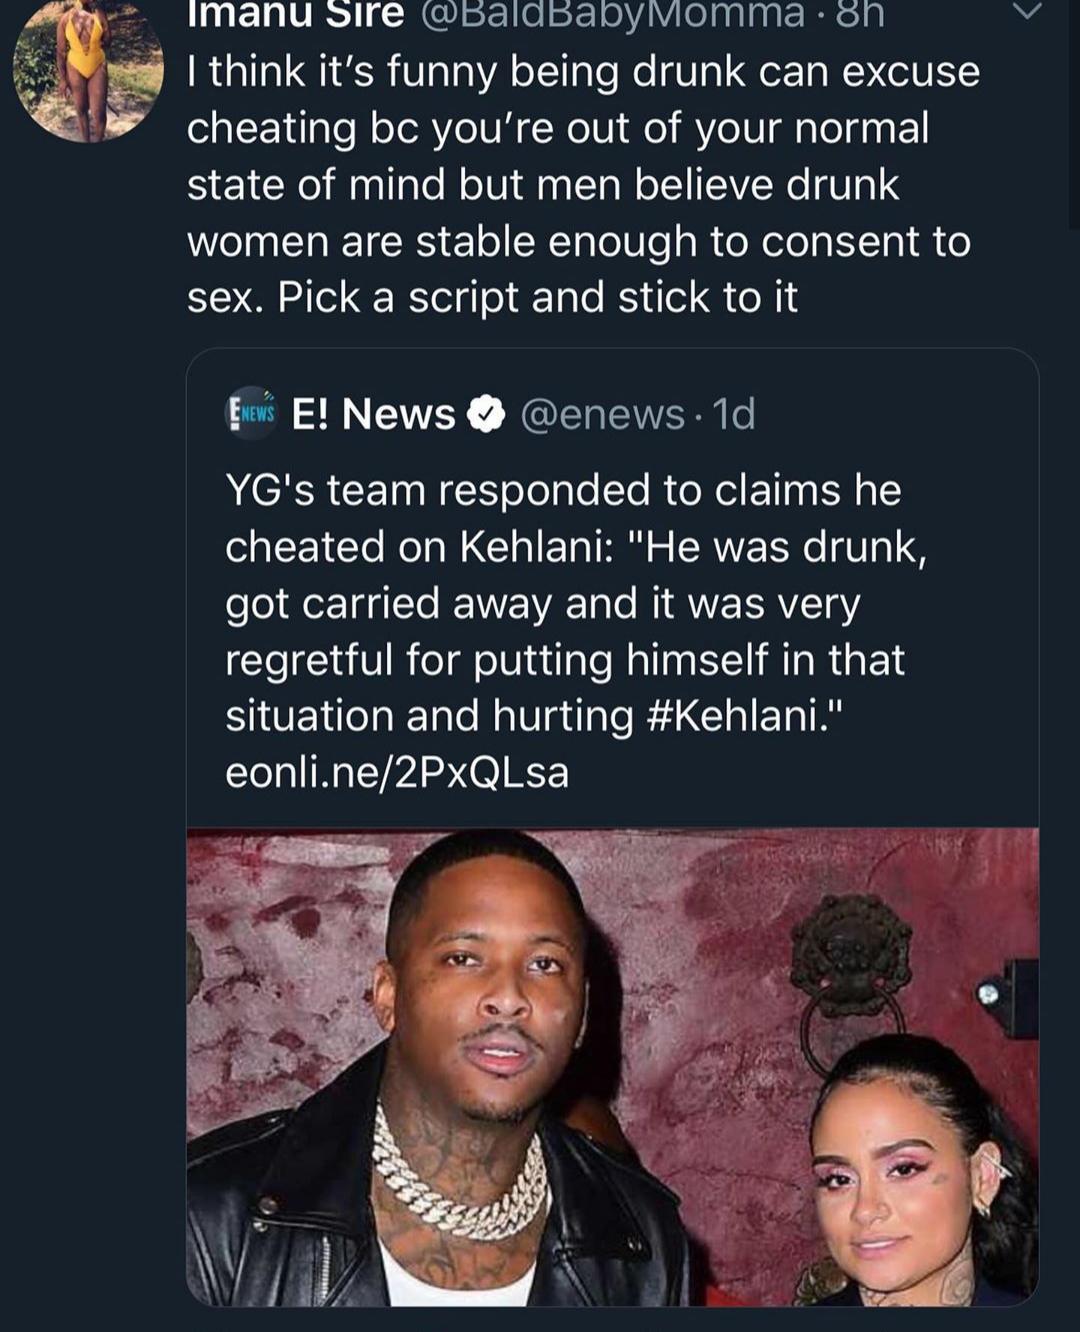 women feminine-memes women text: manu Sire @BaldBaDyMomma • I think it's funny being drunk can excuse cheating bc you're out of your normal state of mind but men believe drunk women are stable enough to consent to sex. Pick a script and stick to it E! News e @enews Id YGIs team responded to claims he cheated on Kehlani: 